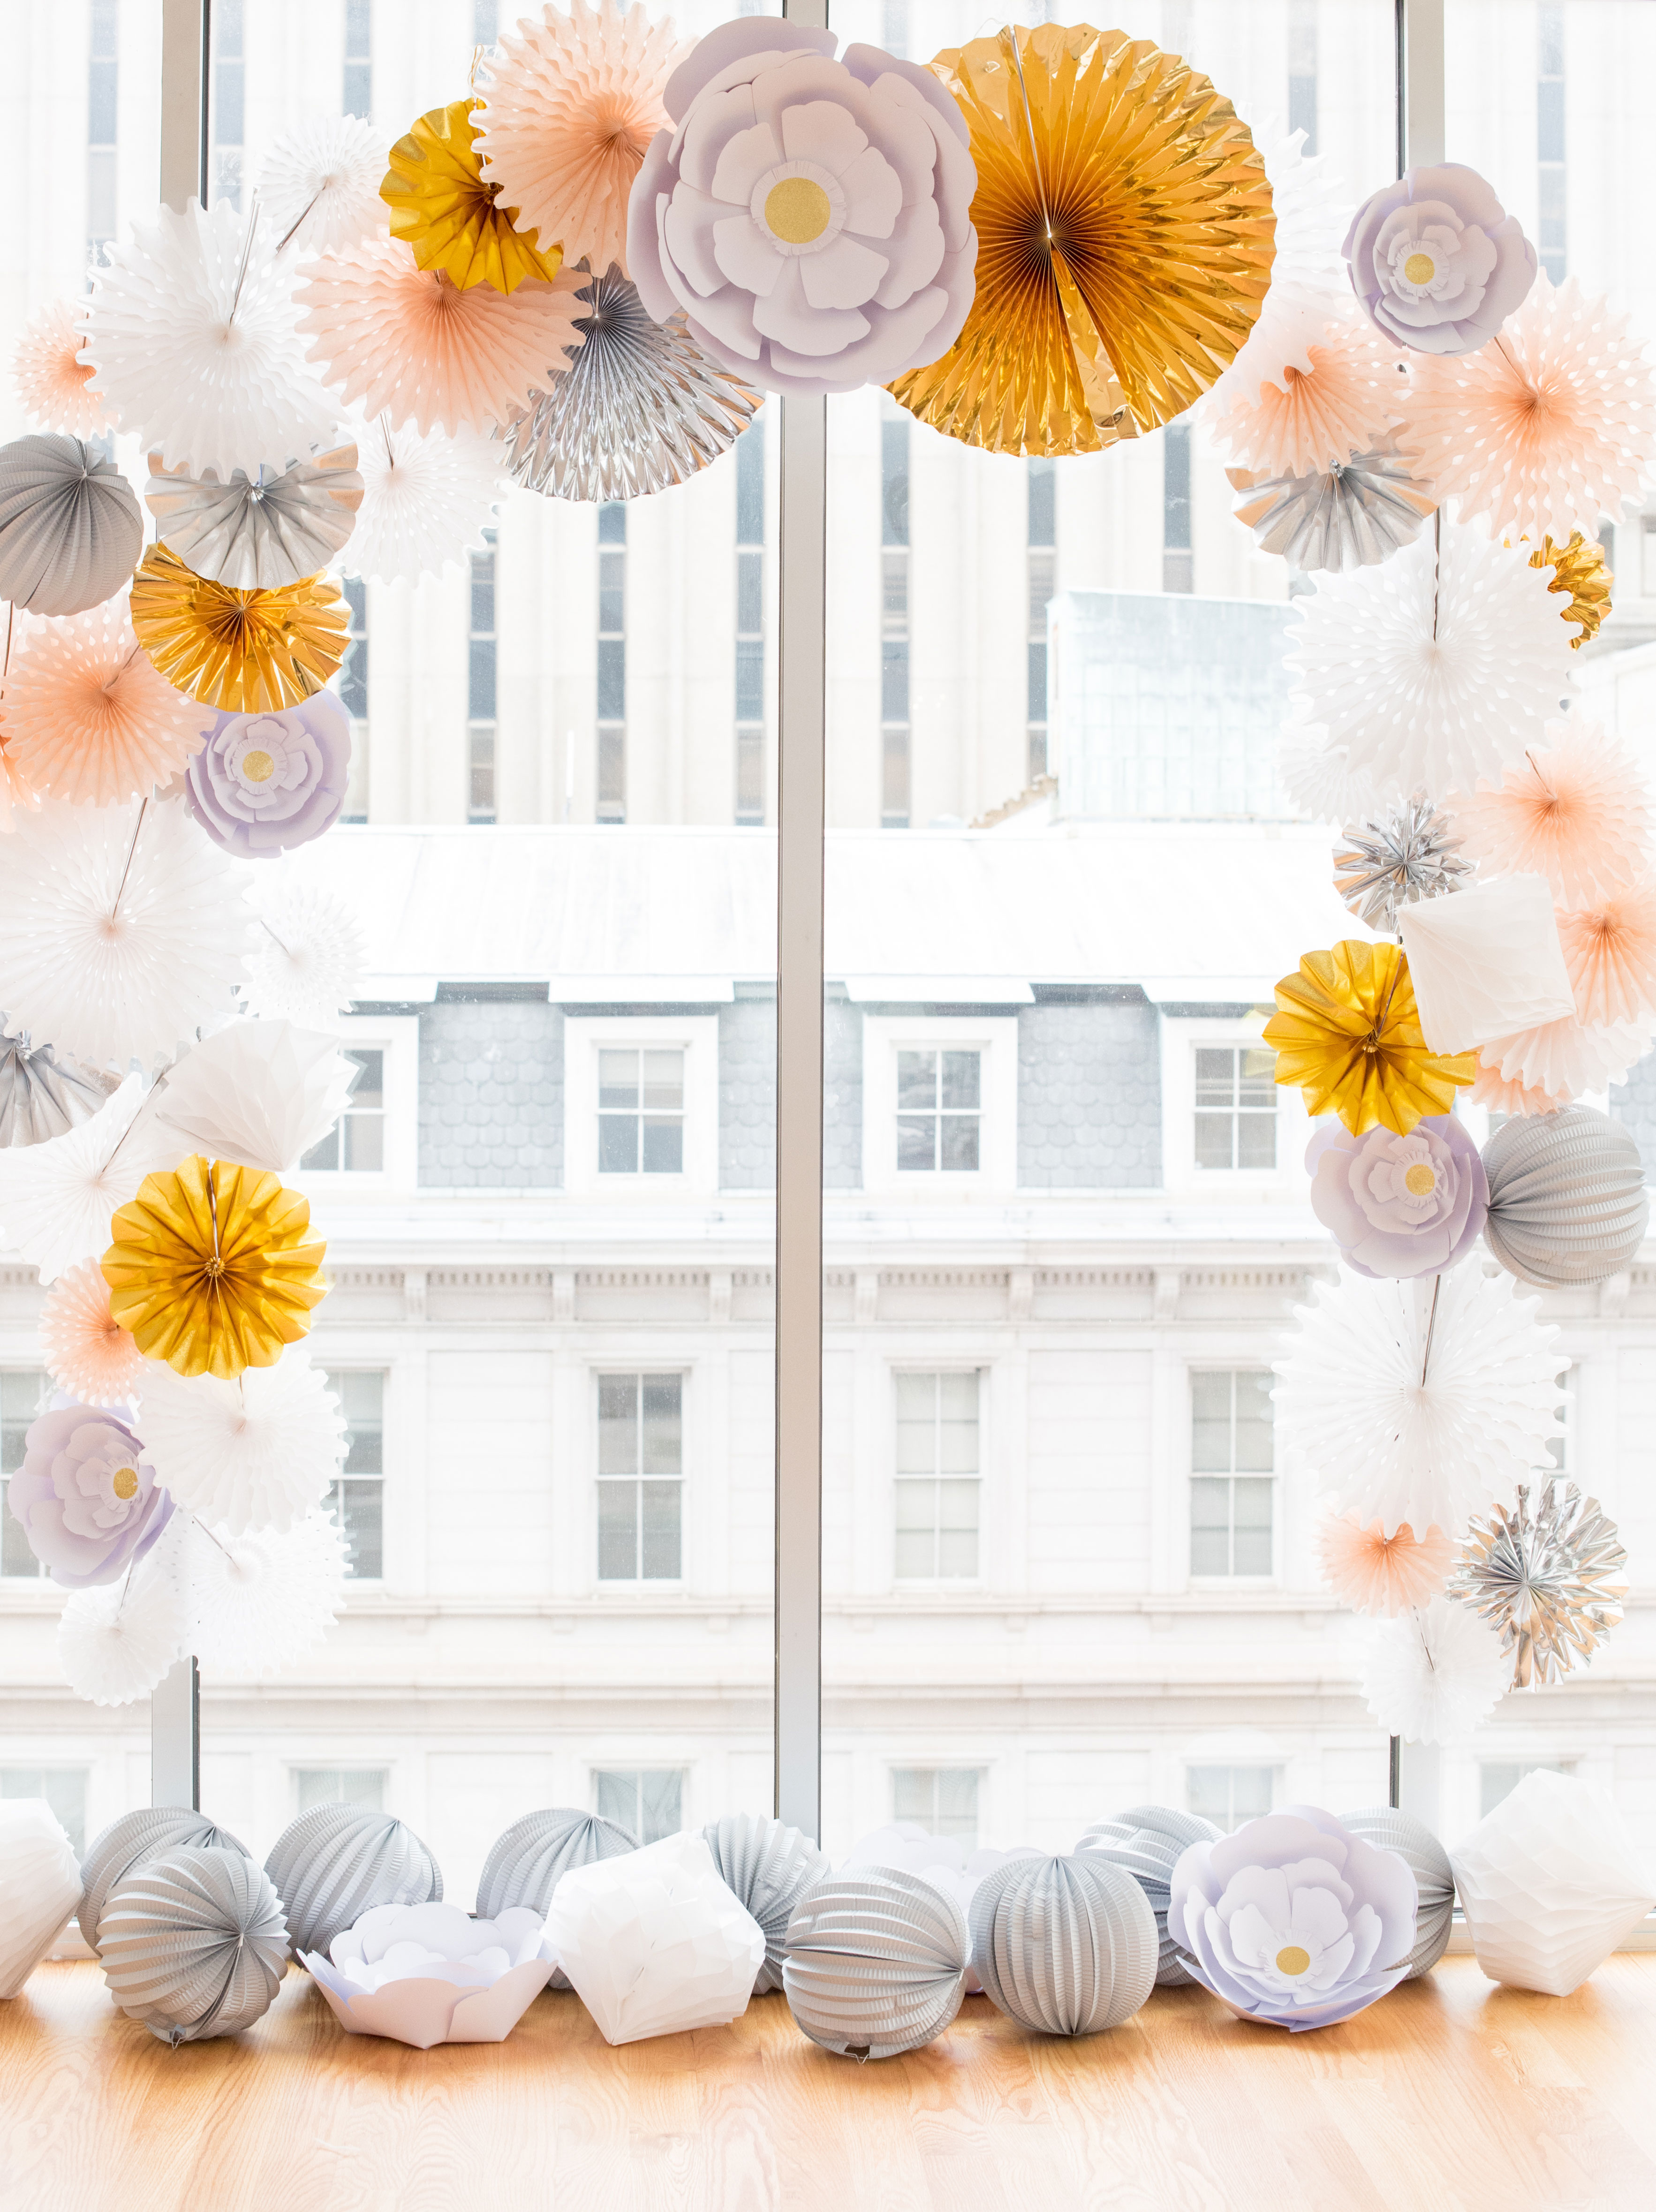 Behind-the-Scenes of a DIY Paper-Crafted Styled Wedding Shoot in The Year's Pantone Colors, Serenity and Rose Quartz, at the Glassbox in Downtown Raleigh North Carolina